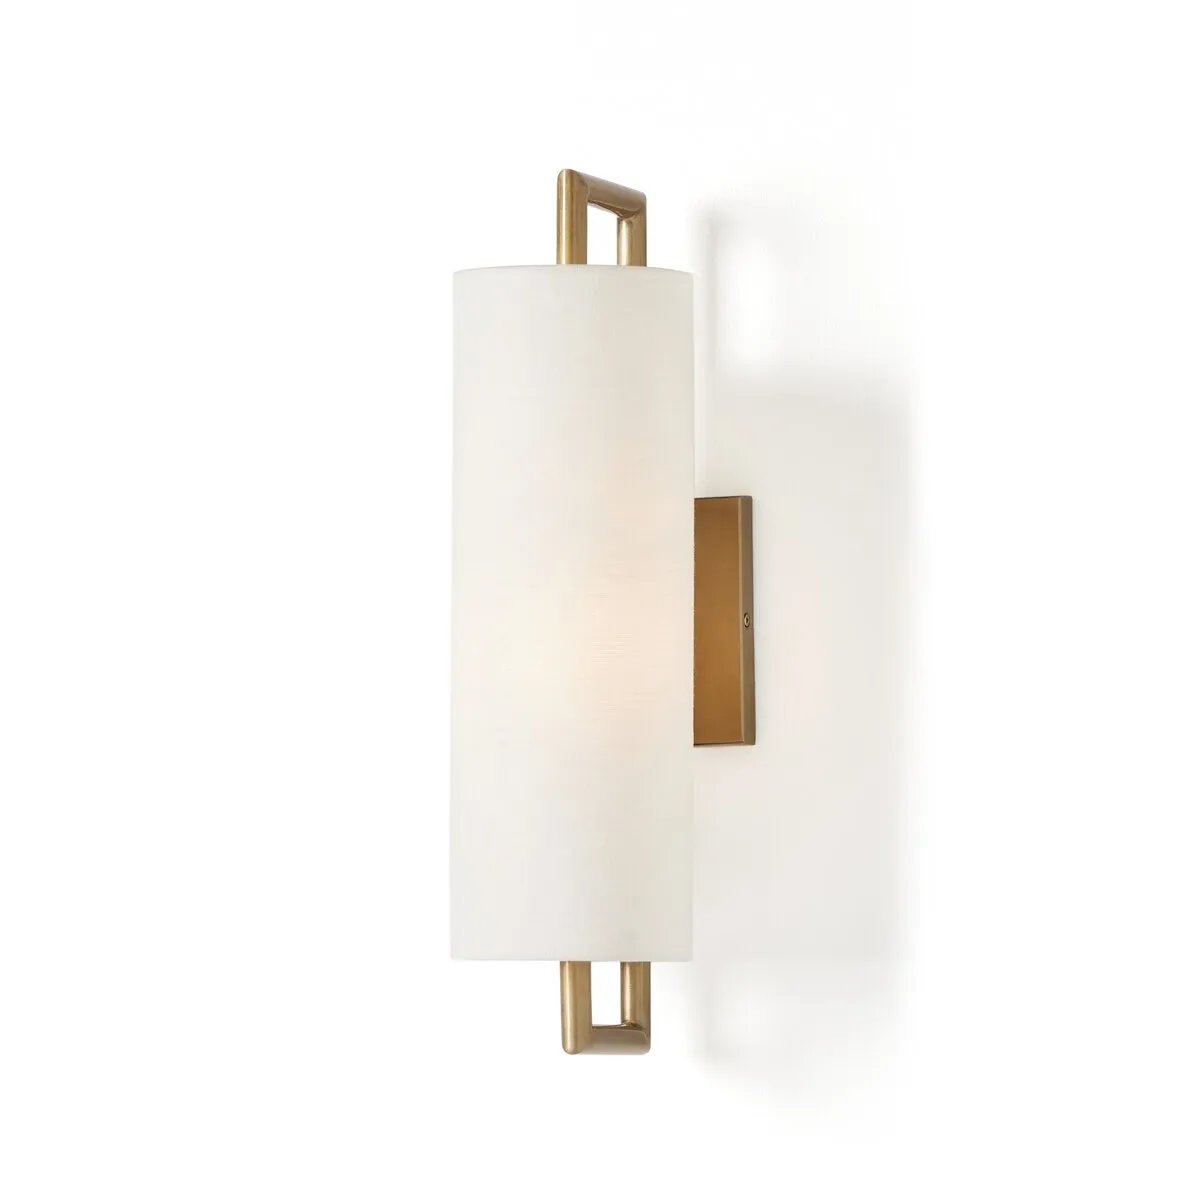 Featuring a single, elongated linen shade, this sconce gracefully diffuses light and is mounted on a streamlined aged brass frame for a sleek, contemporary look.Collection: Camde Amethyst Home provides interior design, new home construction design consulting, vintage area rugs, and lighting in the Calabasas metro area.